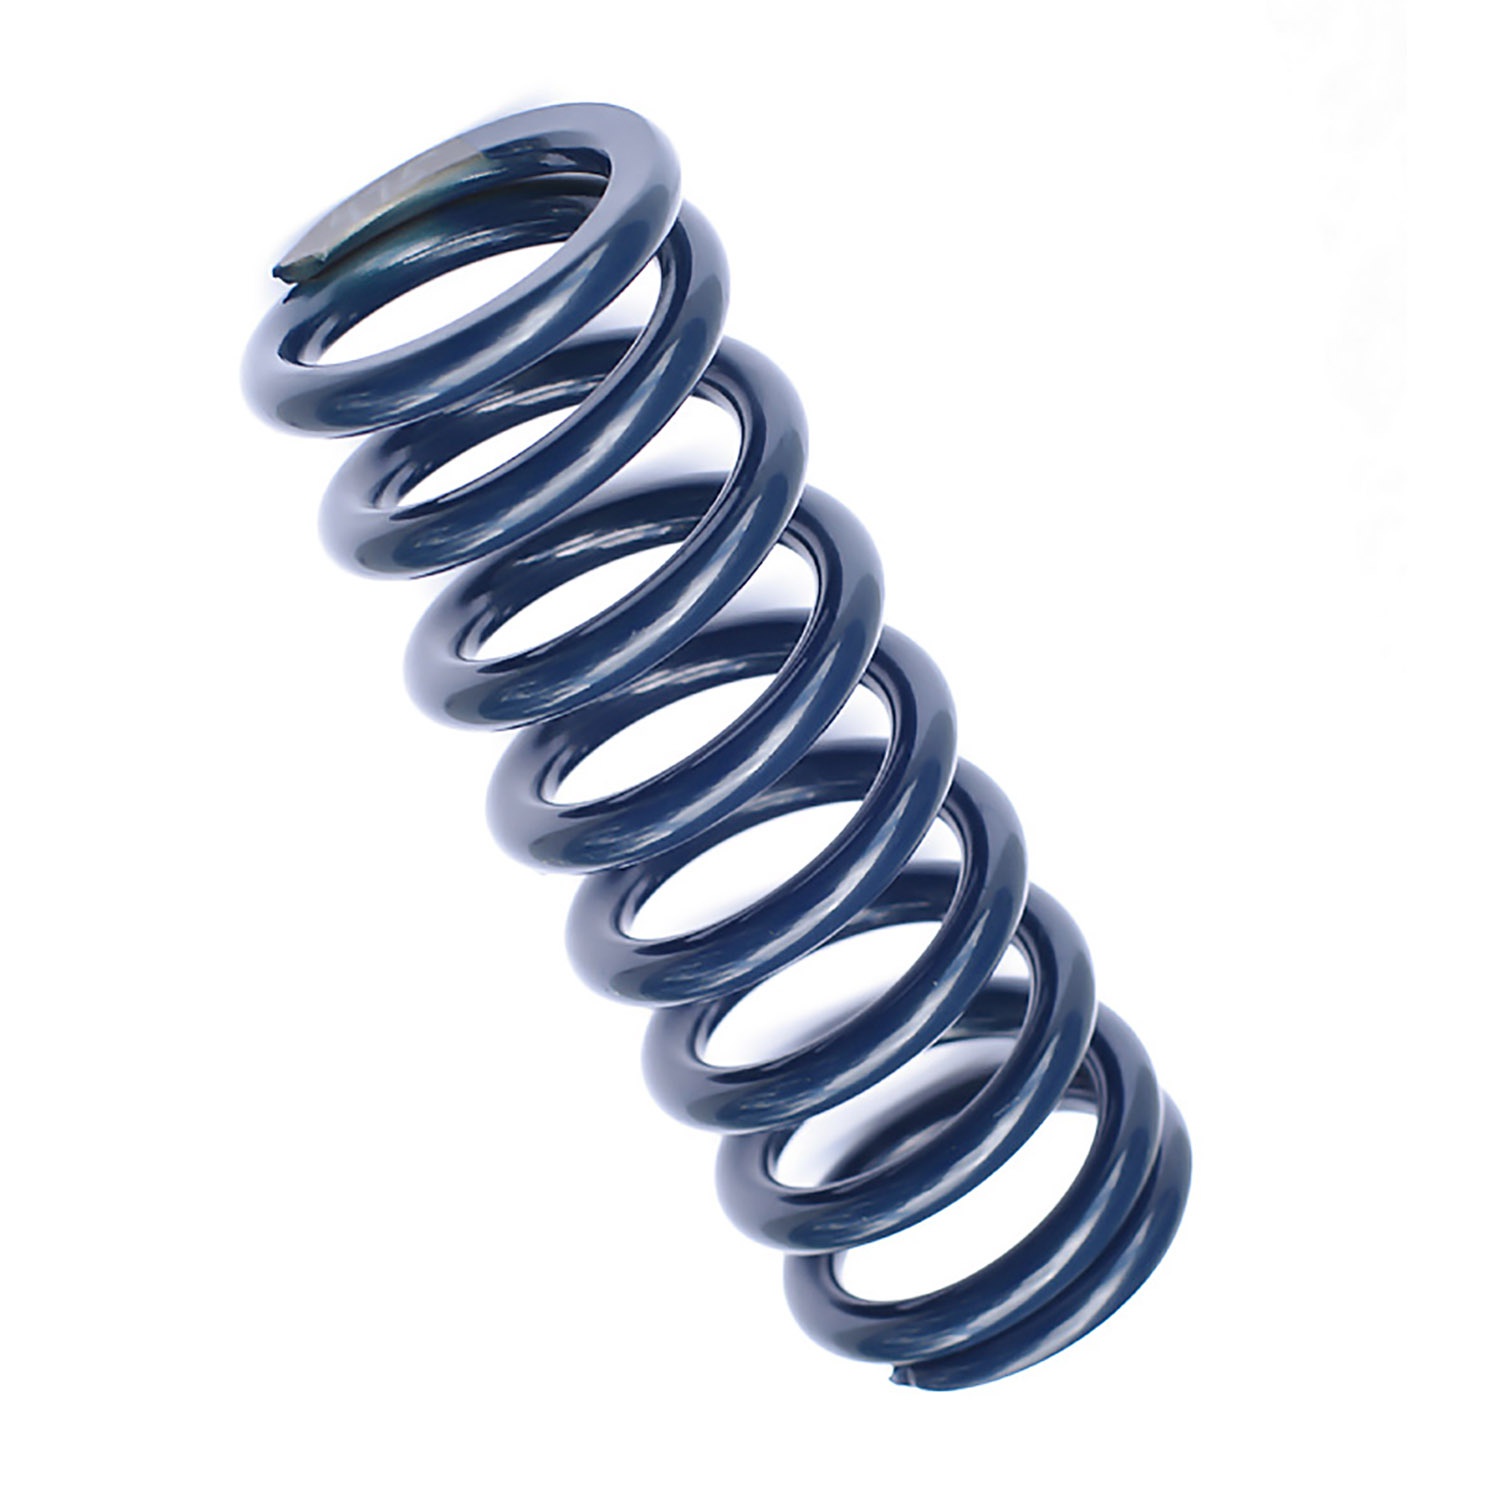 SUSPENSION SPRINGS 12in x 800# Coil Over Spring B12-800